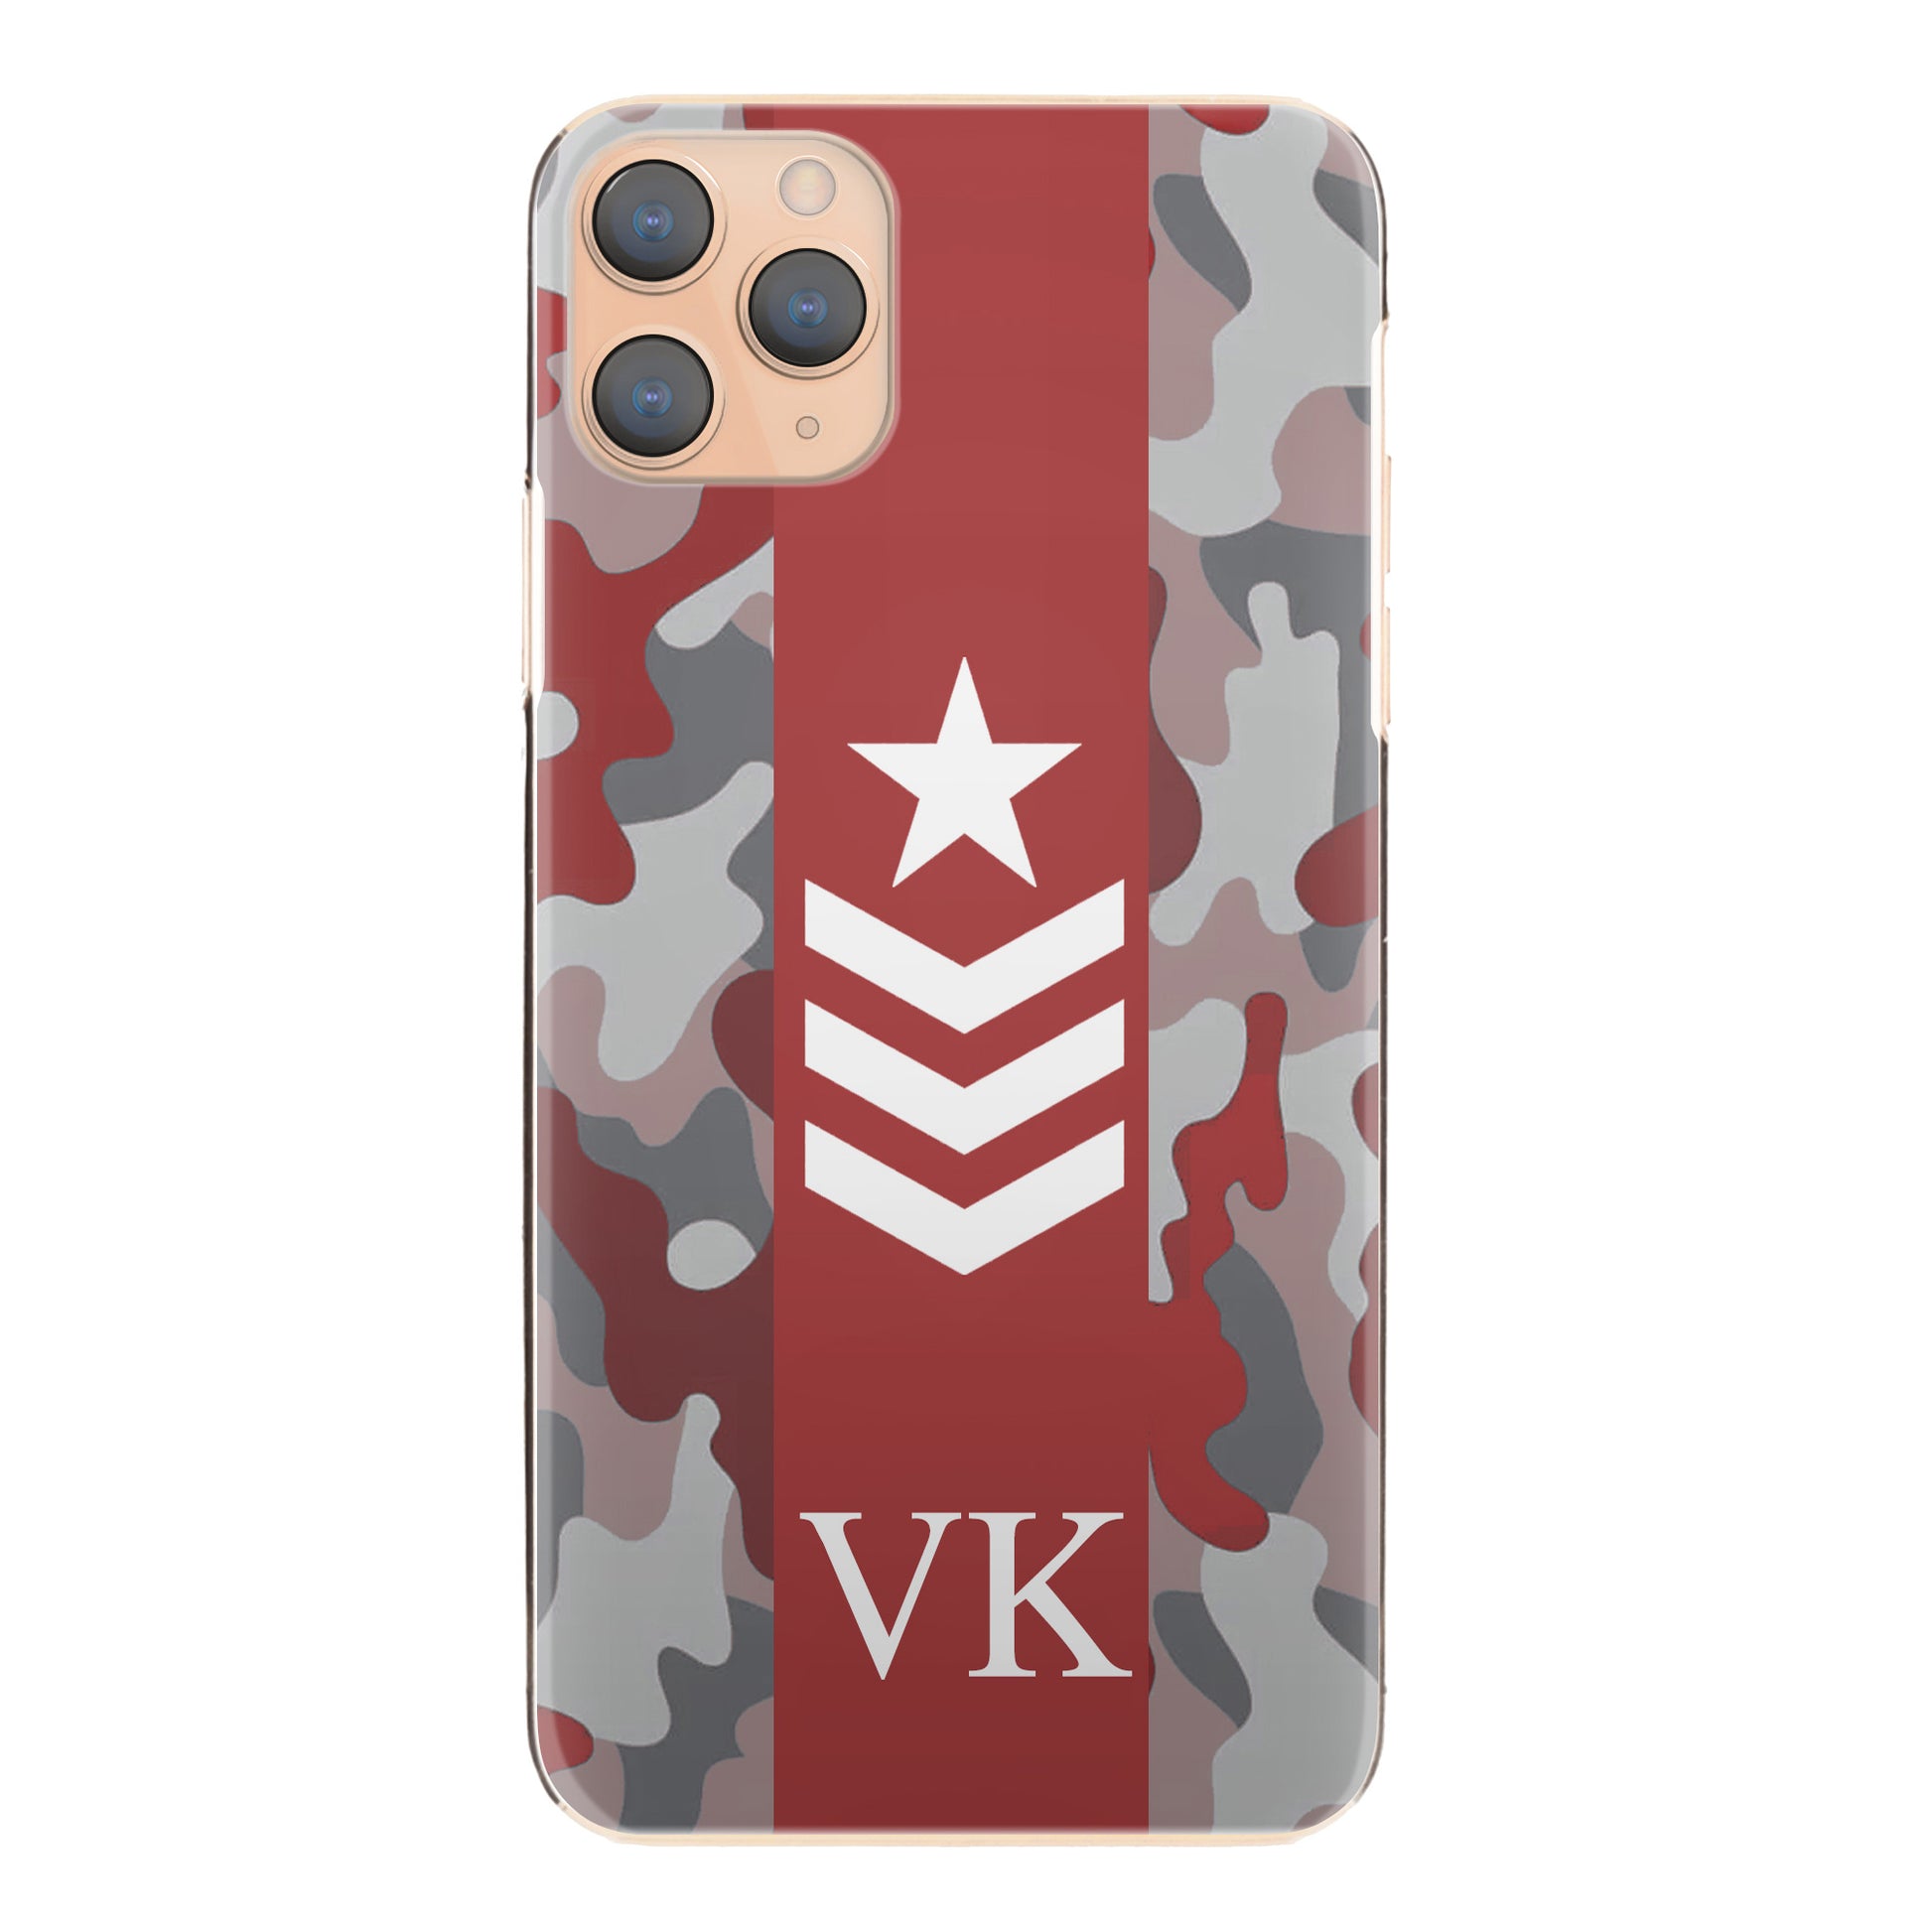 Personalised Apple iPhone Hard Case with Initials and Army Rank on Red Camo